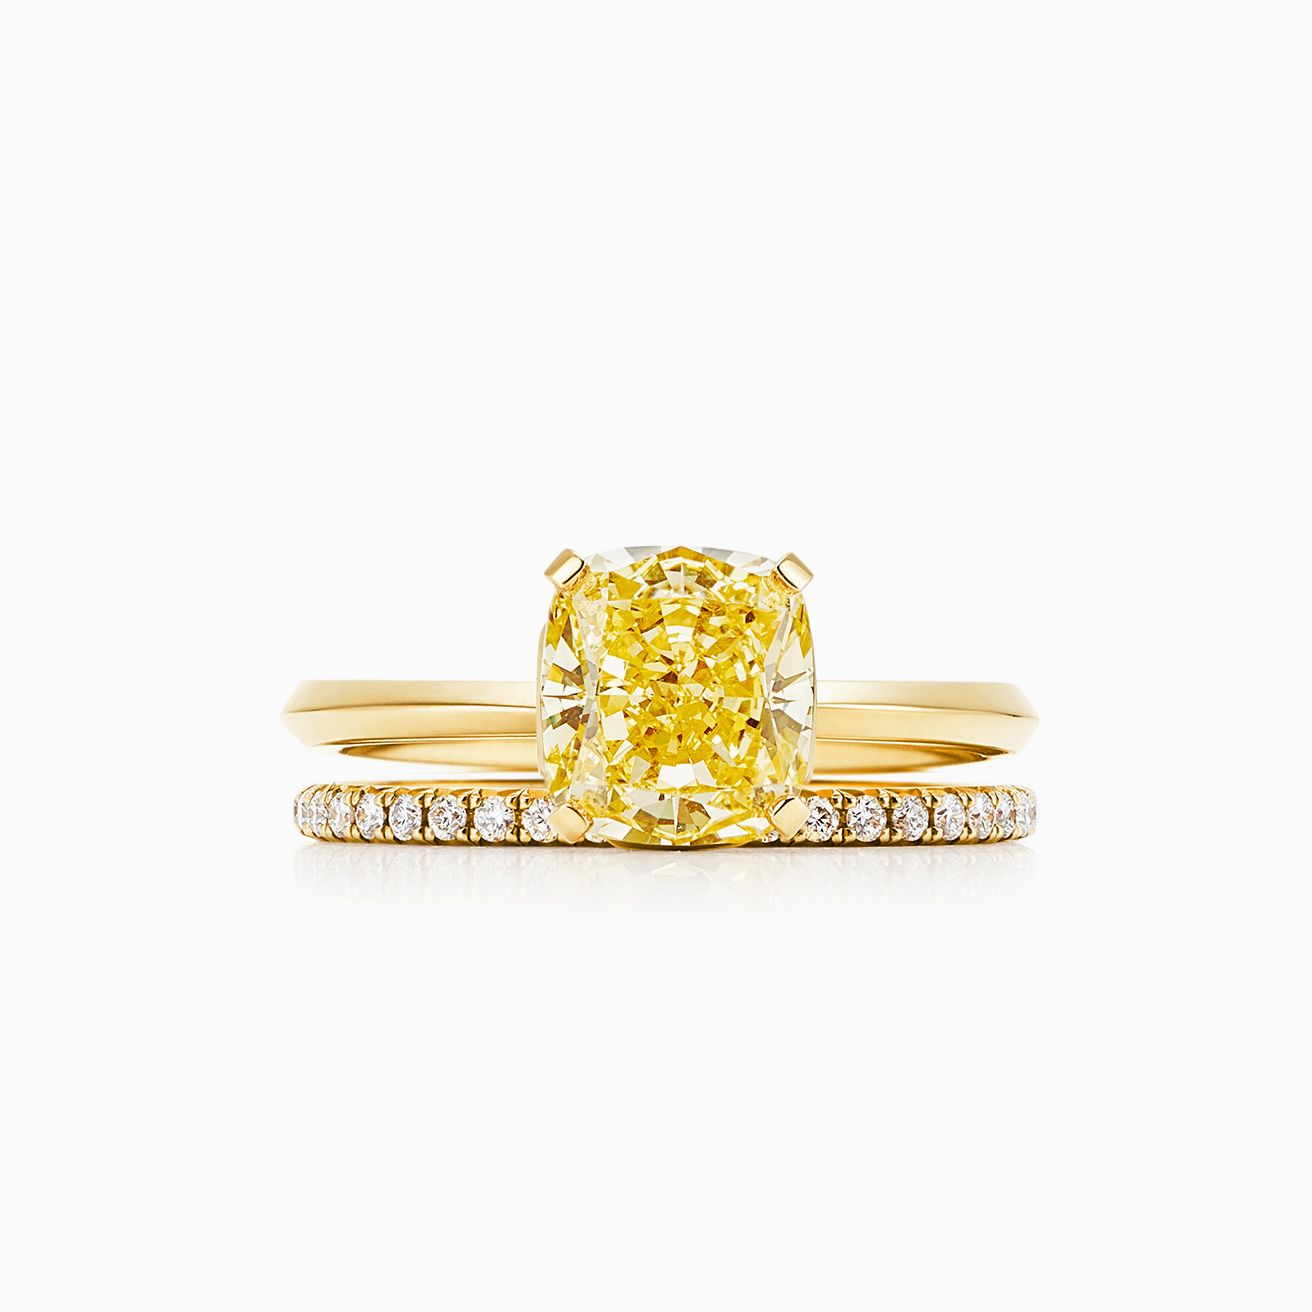 Tiffany True yellow diamond engagement ring in 18k gold: an icon of